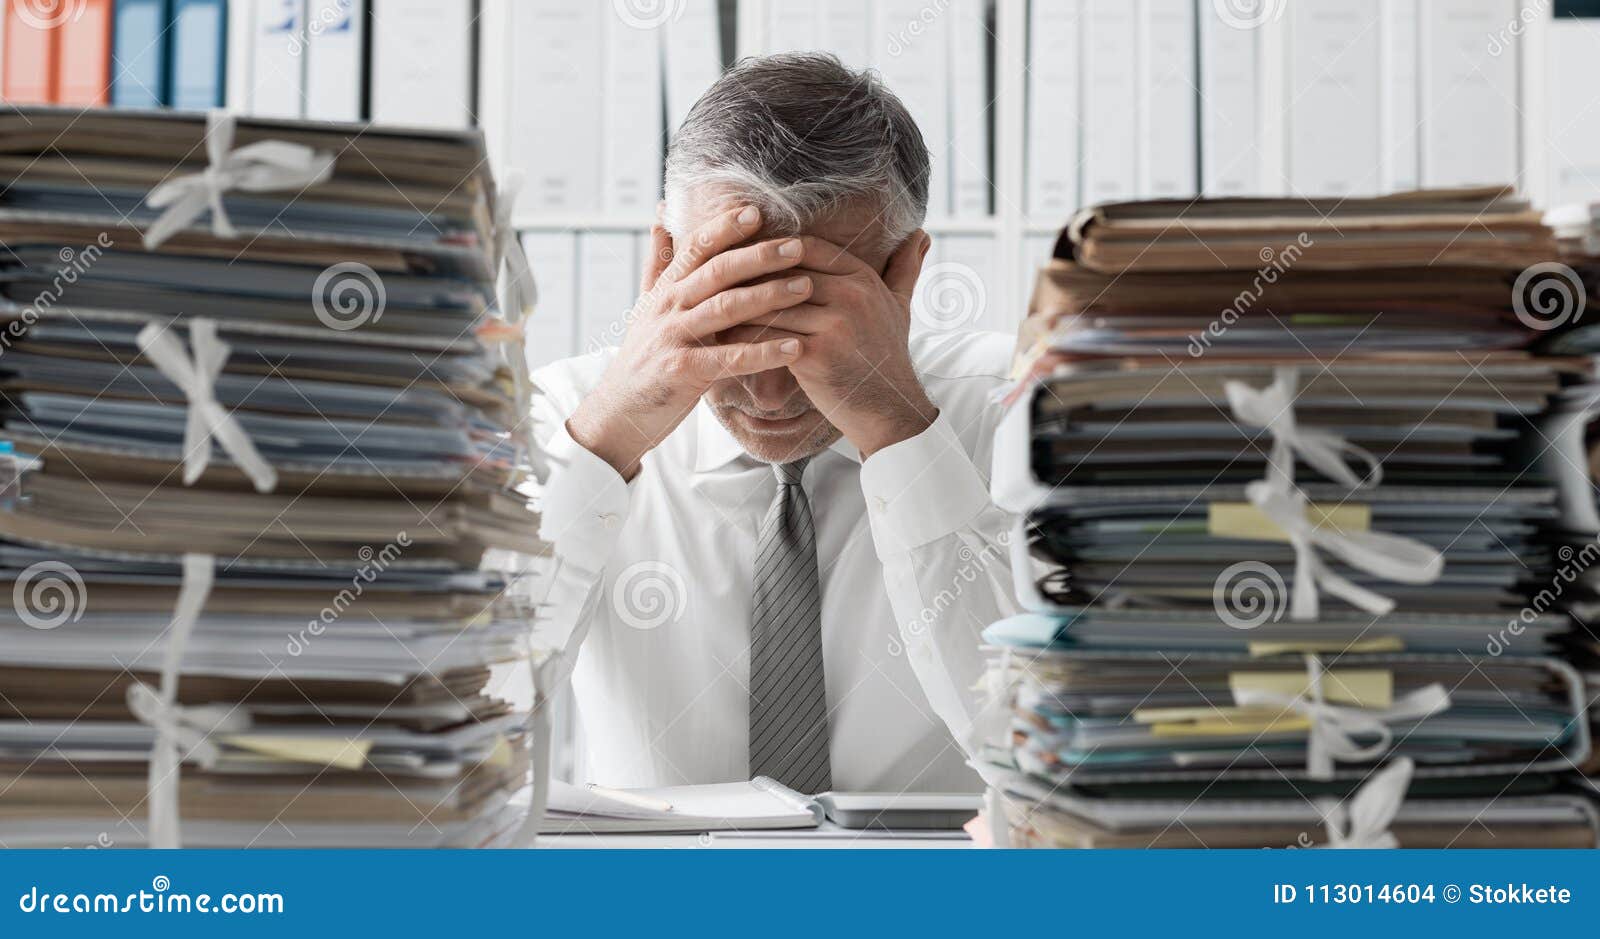 Stressed Business Executive And Piles Of Paperwork Stock Photo